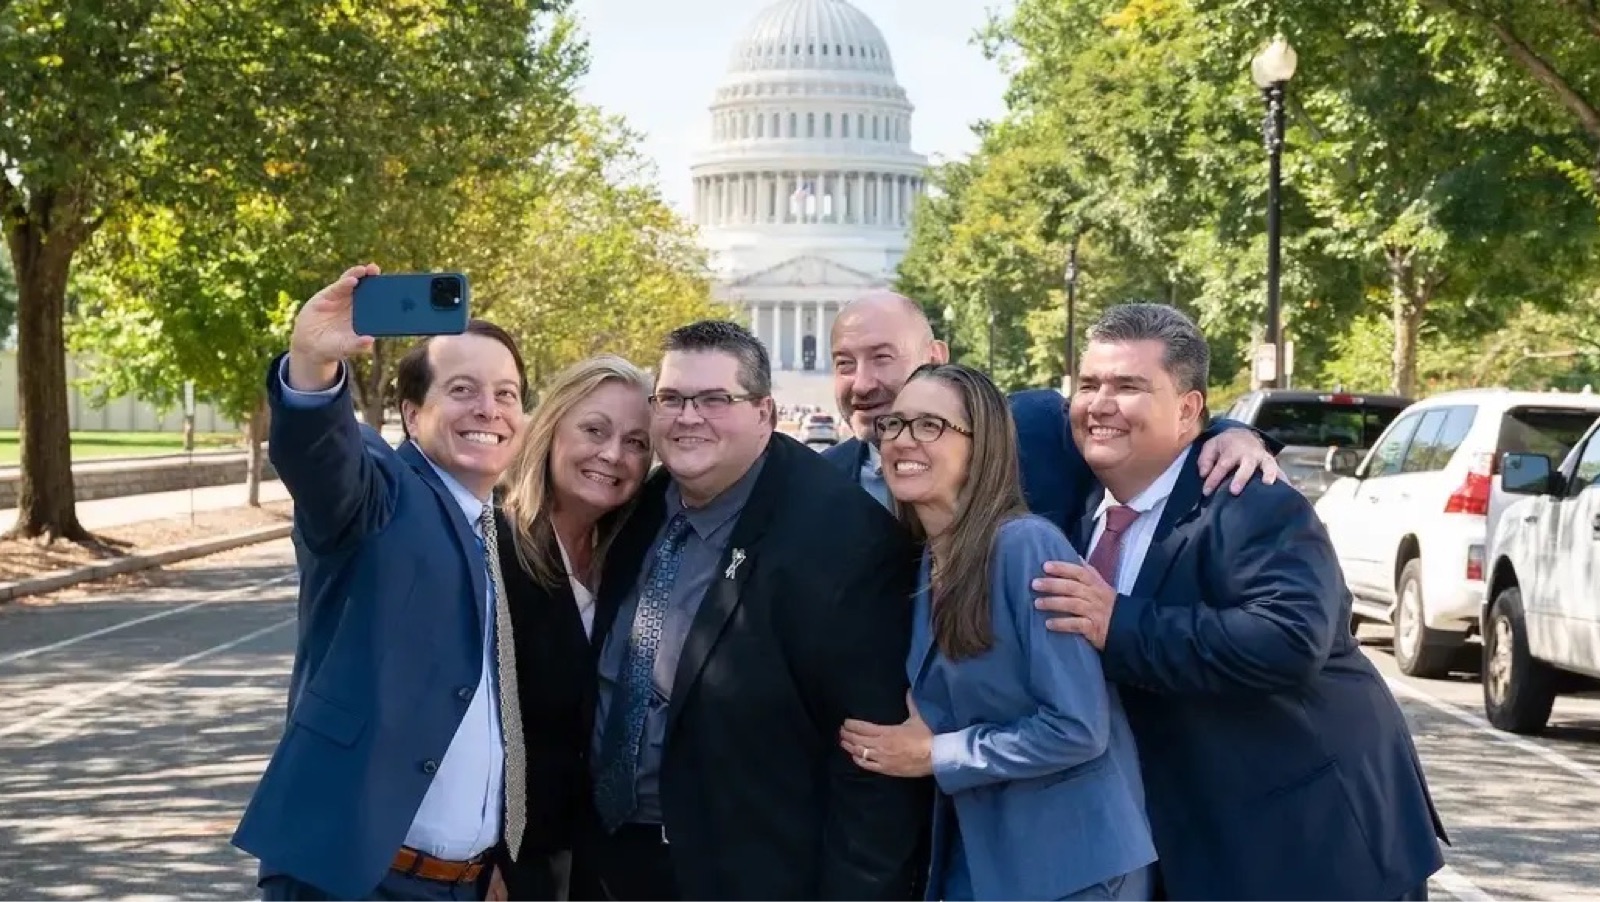 eBay President and CEO Jamie Iannone takes a selfie with a group of sellers in Washington, D.C.